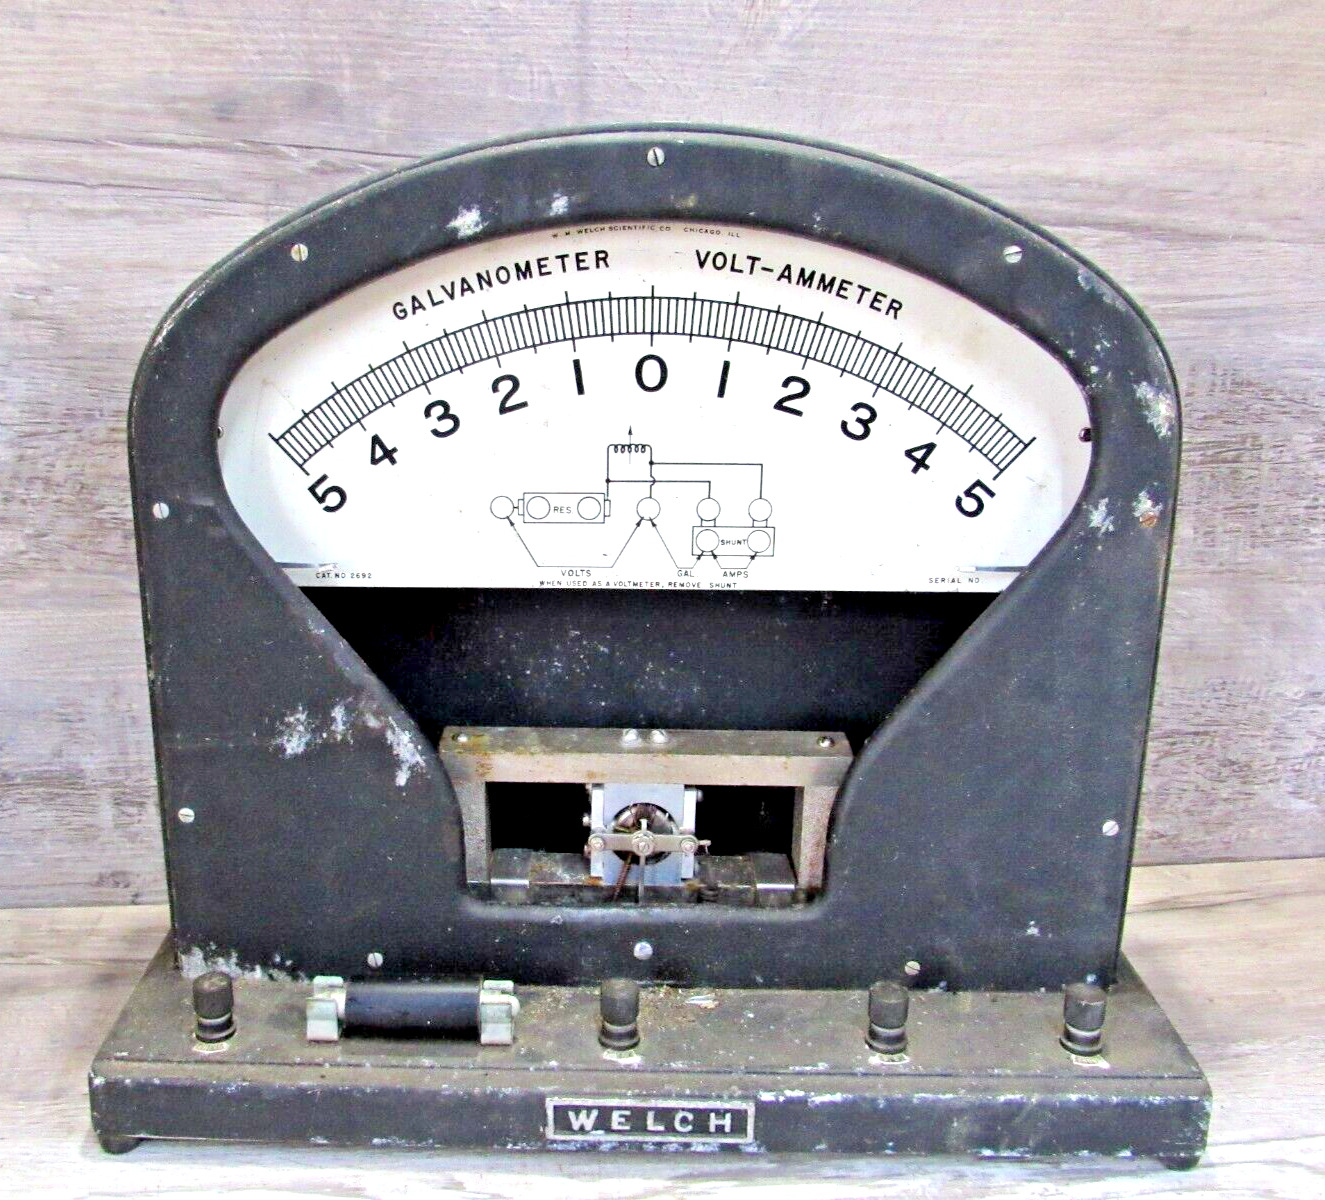 Untested VINTAGE Large WELCH GALVANOMETER VOLT-AMMETER  AS IS